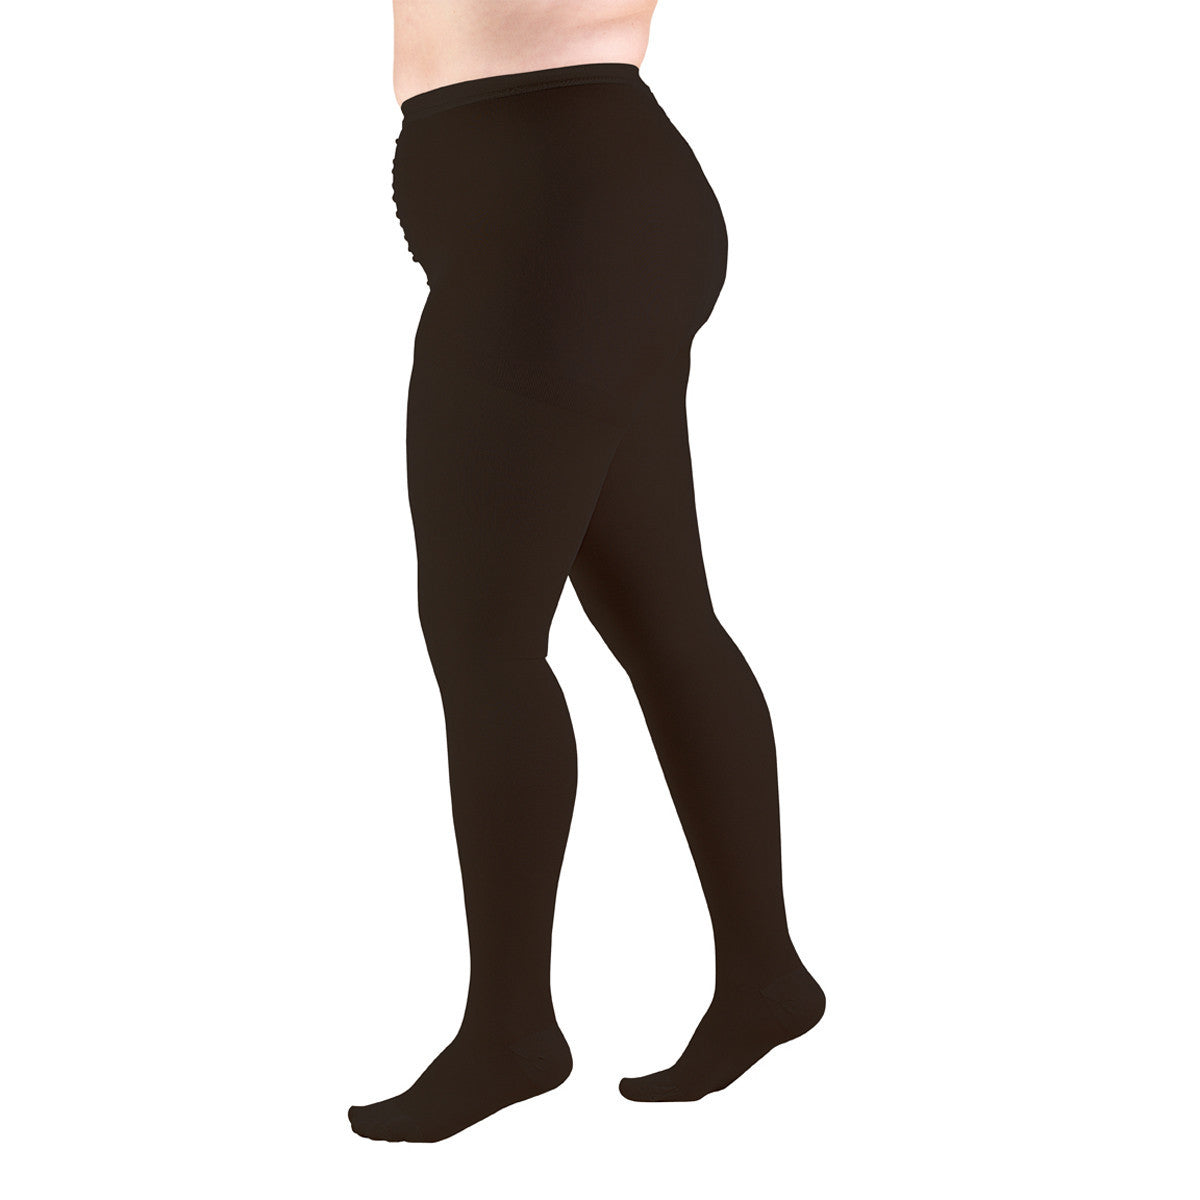 Medical Compression Pantyhose for Women & Men, Firm Support 20